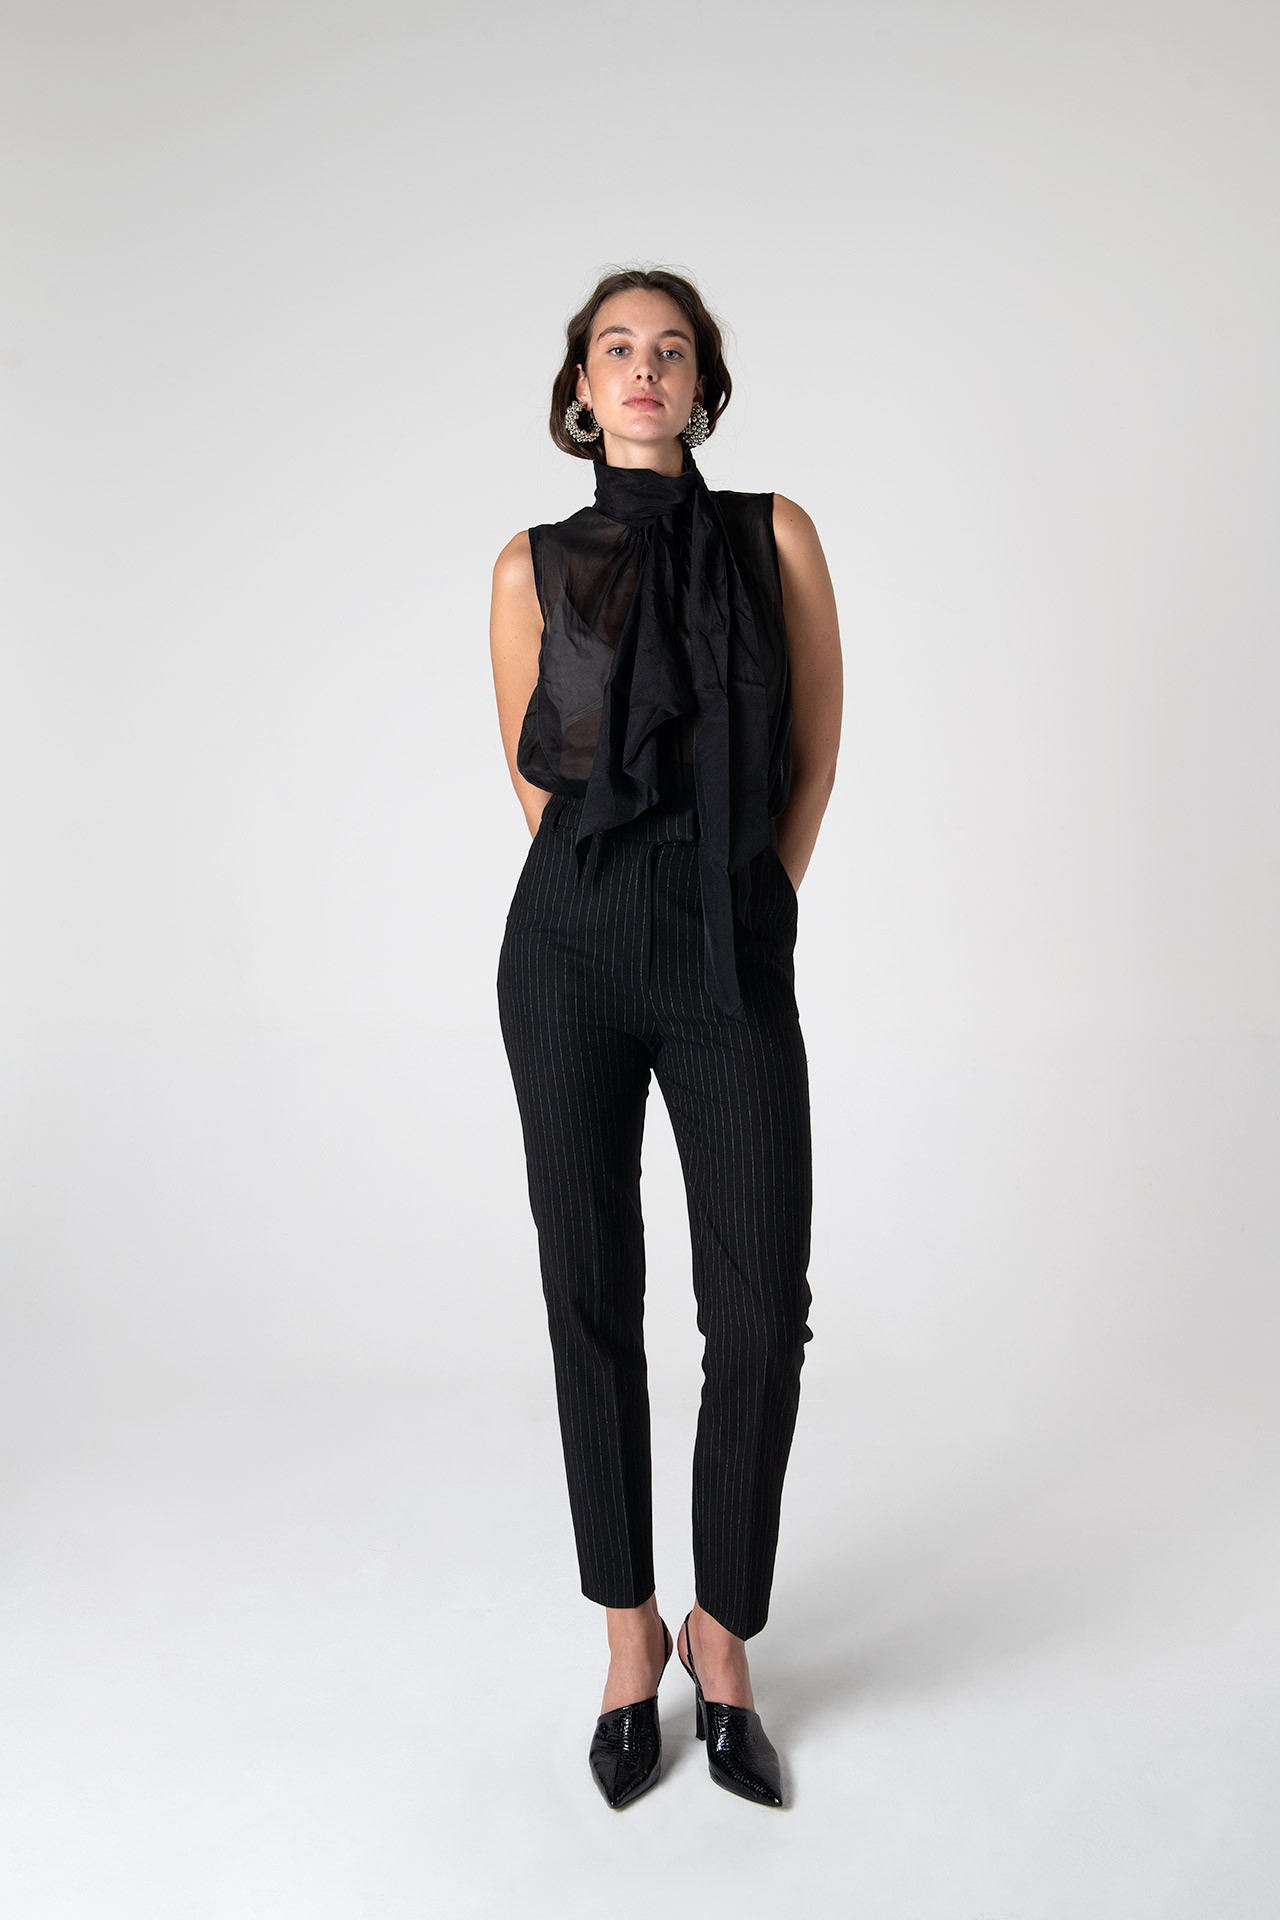 Marcy Lacy Slim Fit Trousers - Black